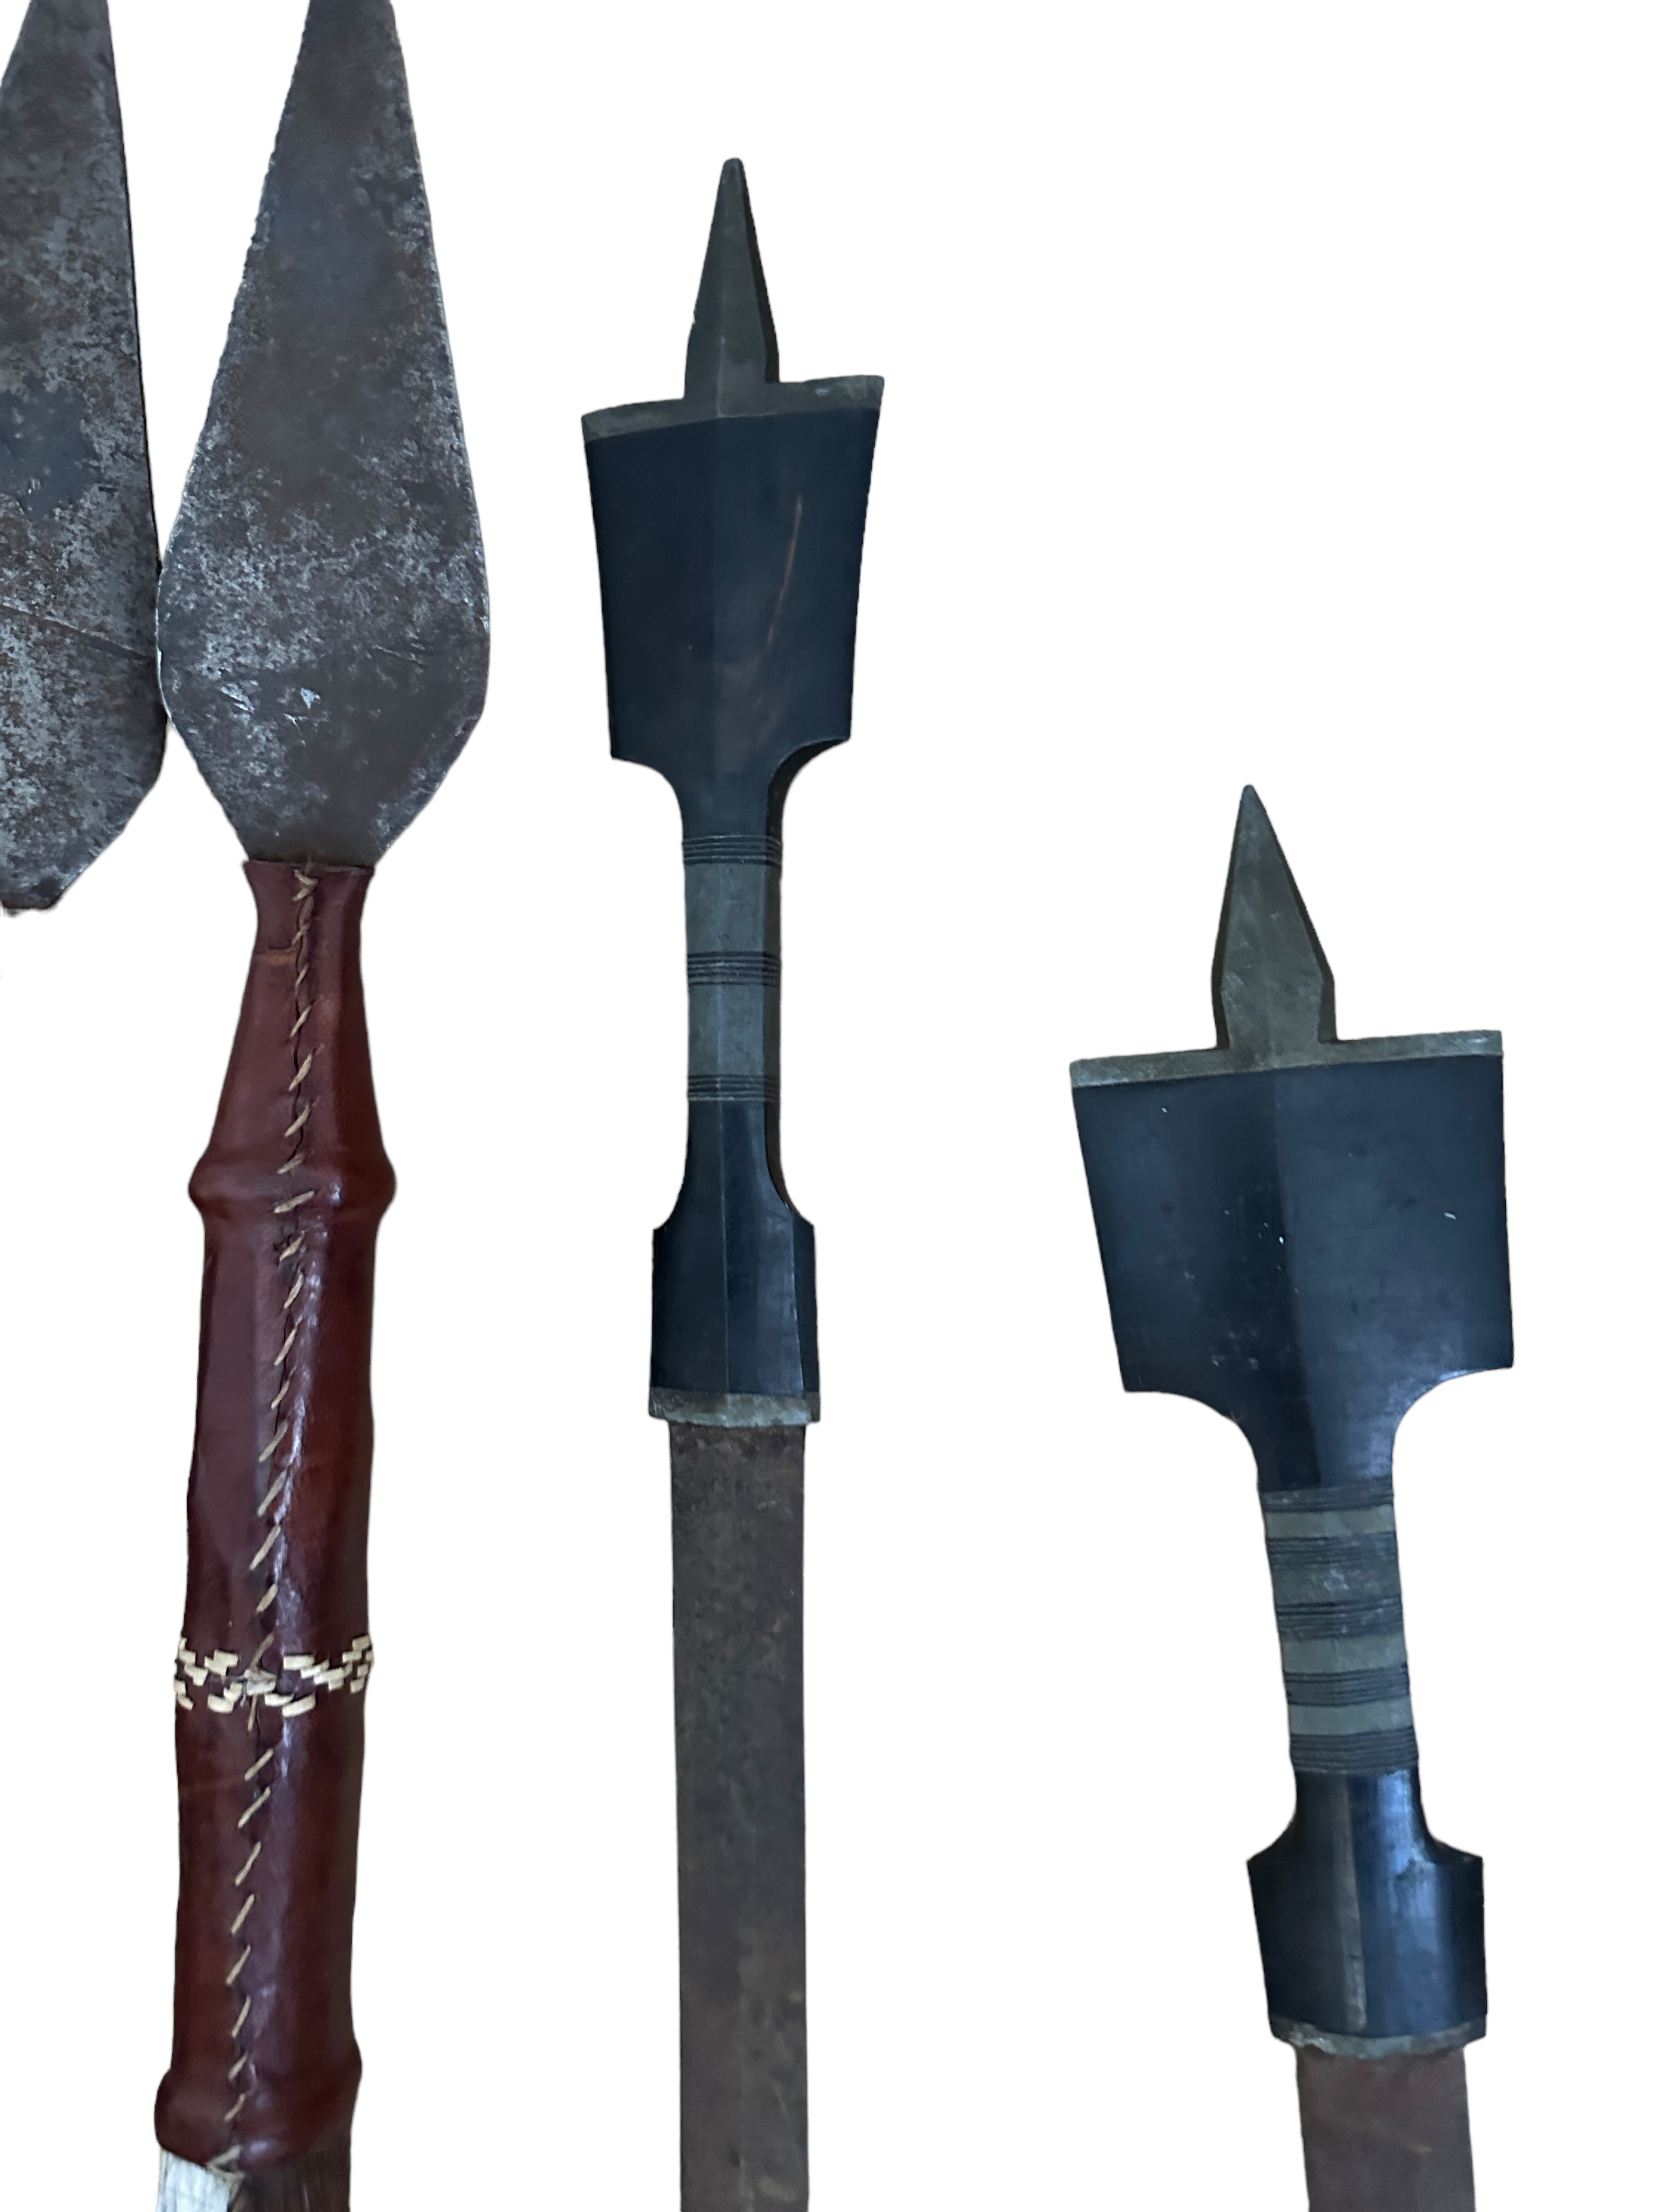 Duo of African Swords 74cm and 63cm and duo of Hide Covered Spears - 86cm long. - Image 6 of 6